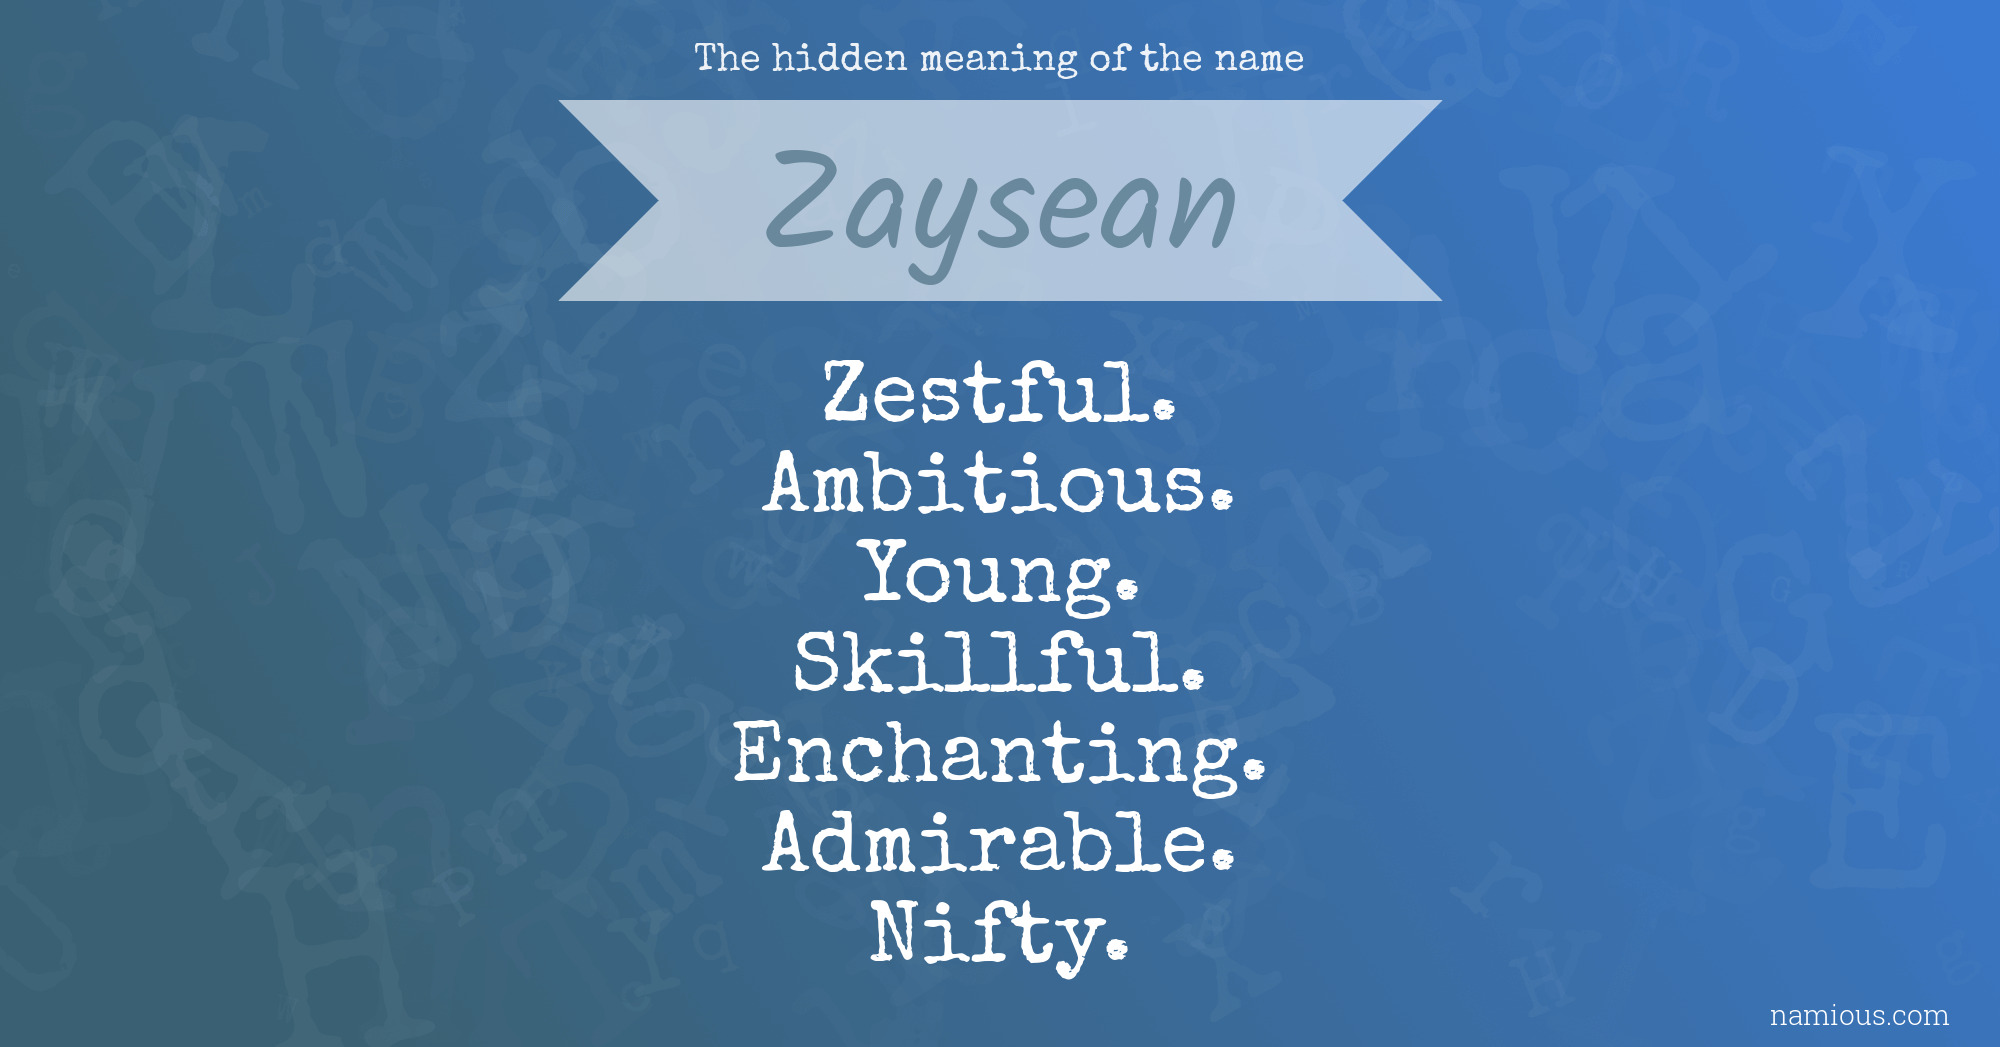 The hidden meaning of the name Zaysean